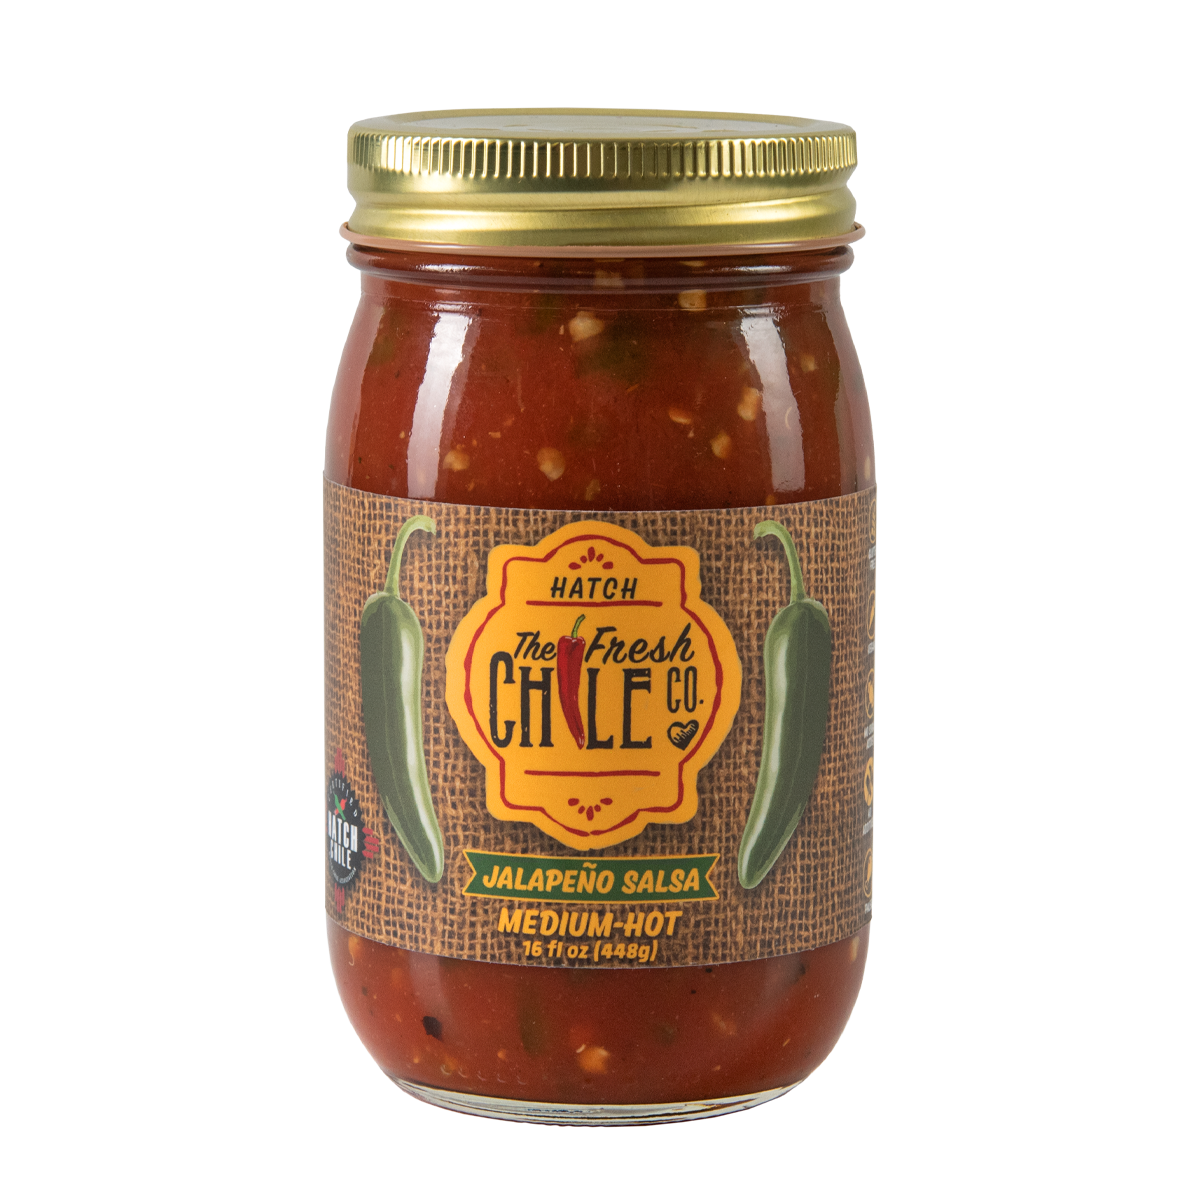 A glass jar of Hatch Jalapeño Salsa labeled "The Fresh Chile Co. Hatch" in medium-hot spiciness, sealed with a metal lid, isolated on a white background. Perfect for New Mexican salsa recipes.